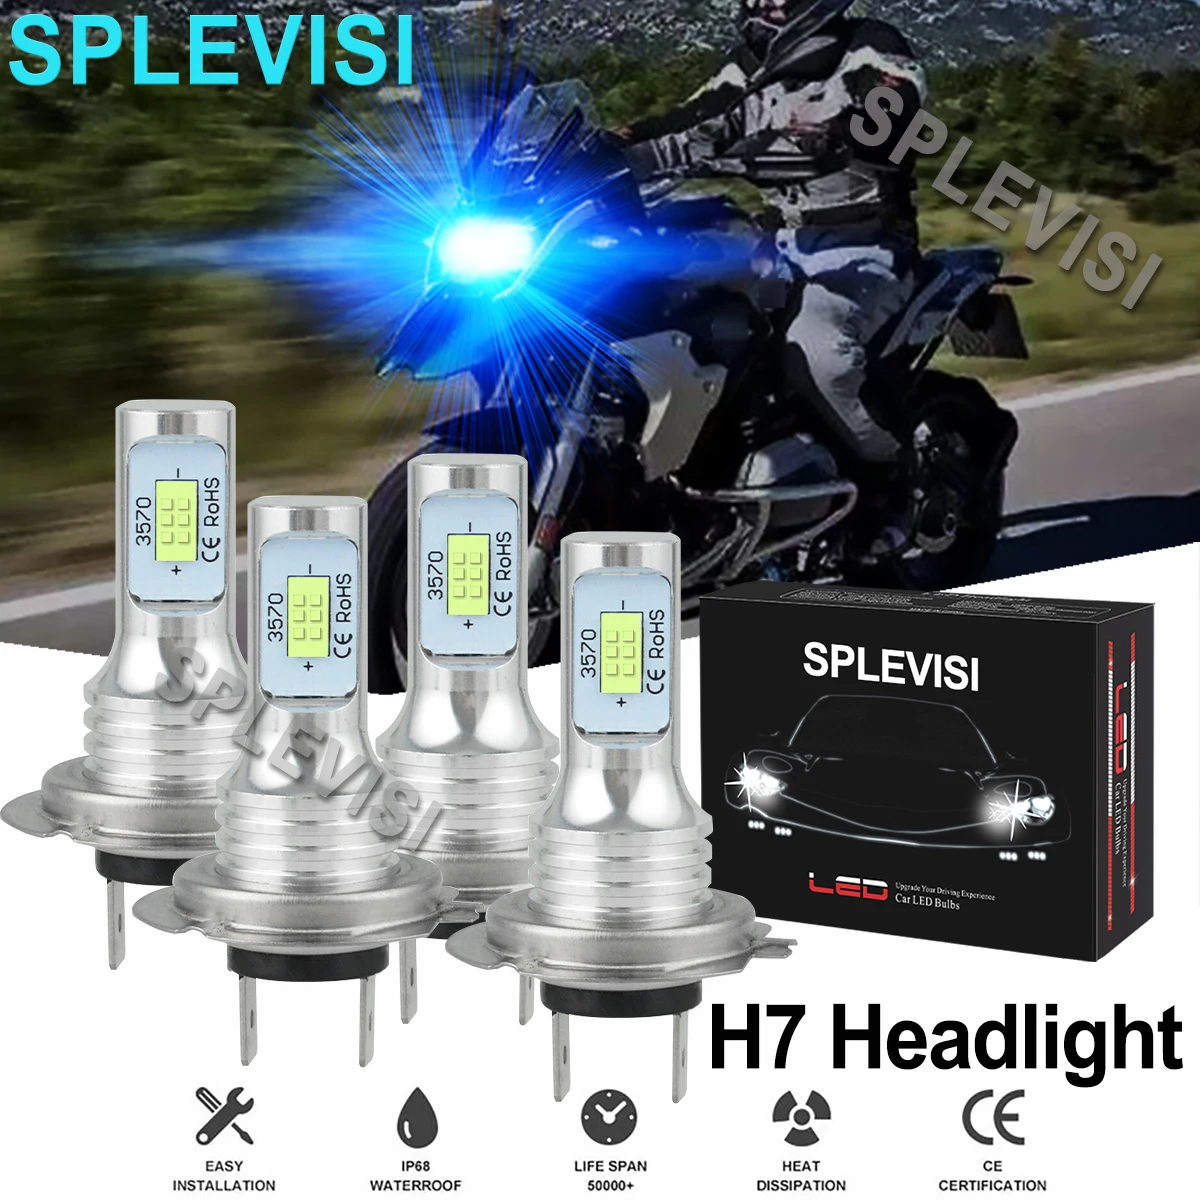 

4PCS 8000K Ice Blue 35W LED Motorcycle Headlight Hi Low Beam For BMW R1200GS 2004-2018R1200RT 2006 2008 2010 R1200S 2006-2007